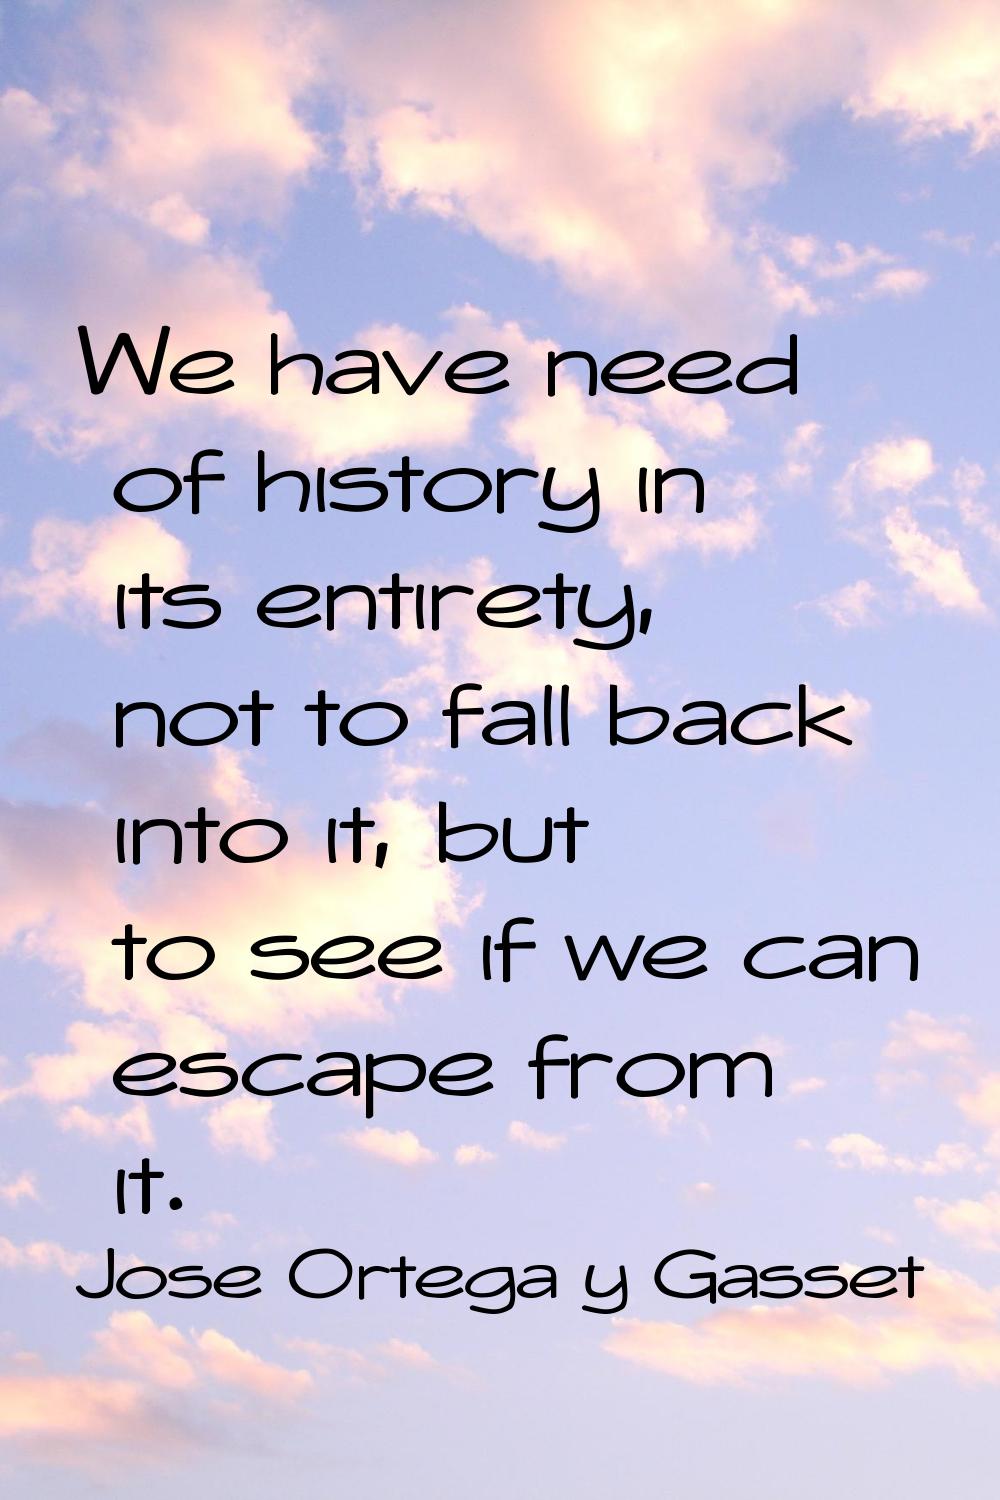 We have need of history in its entirety, not to fall back into it, but to see if we can escape from